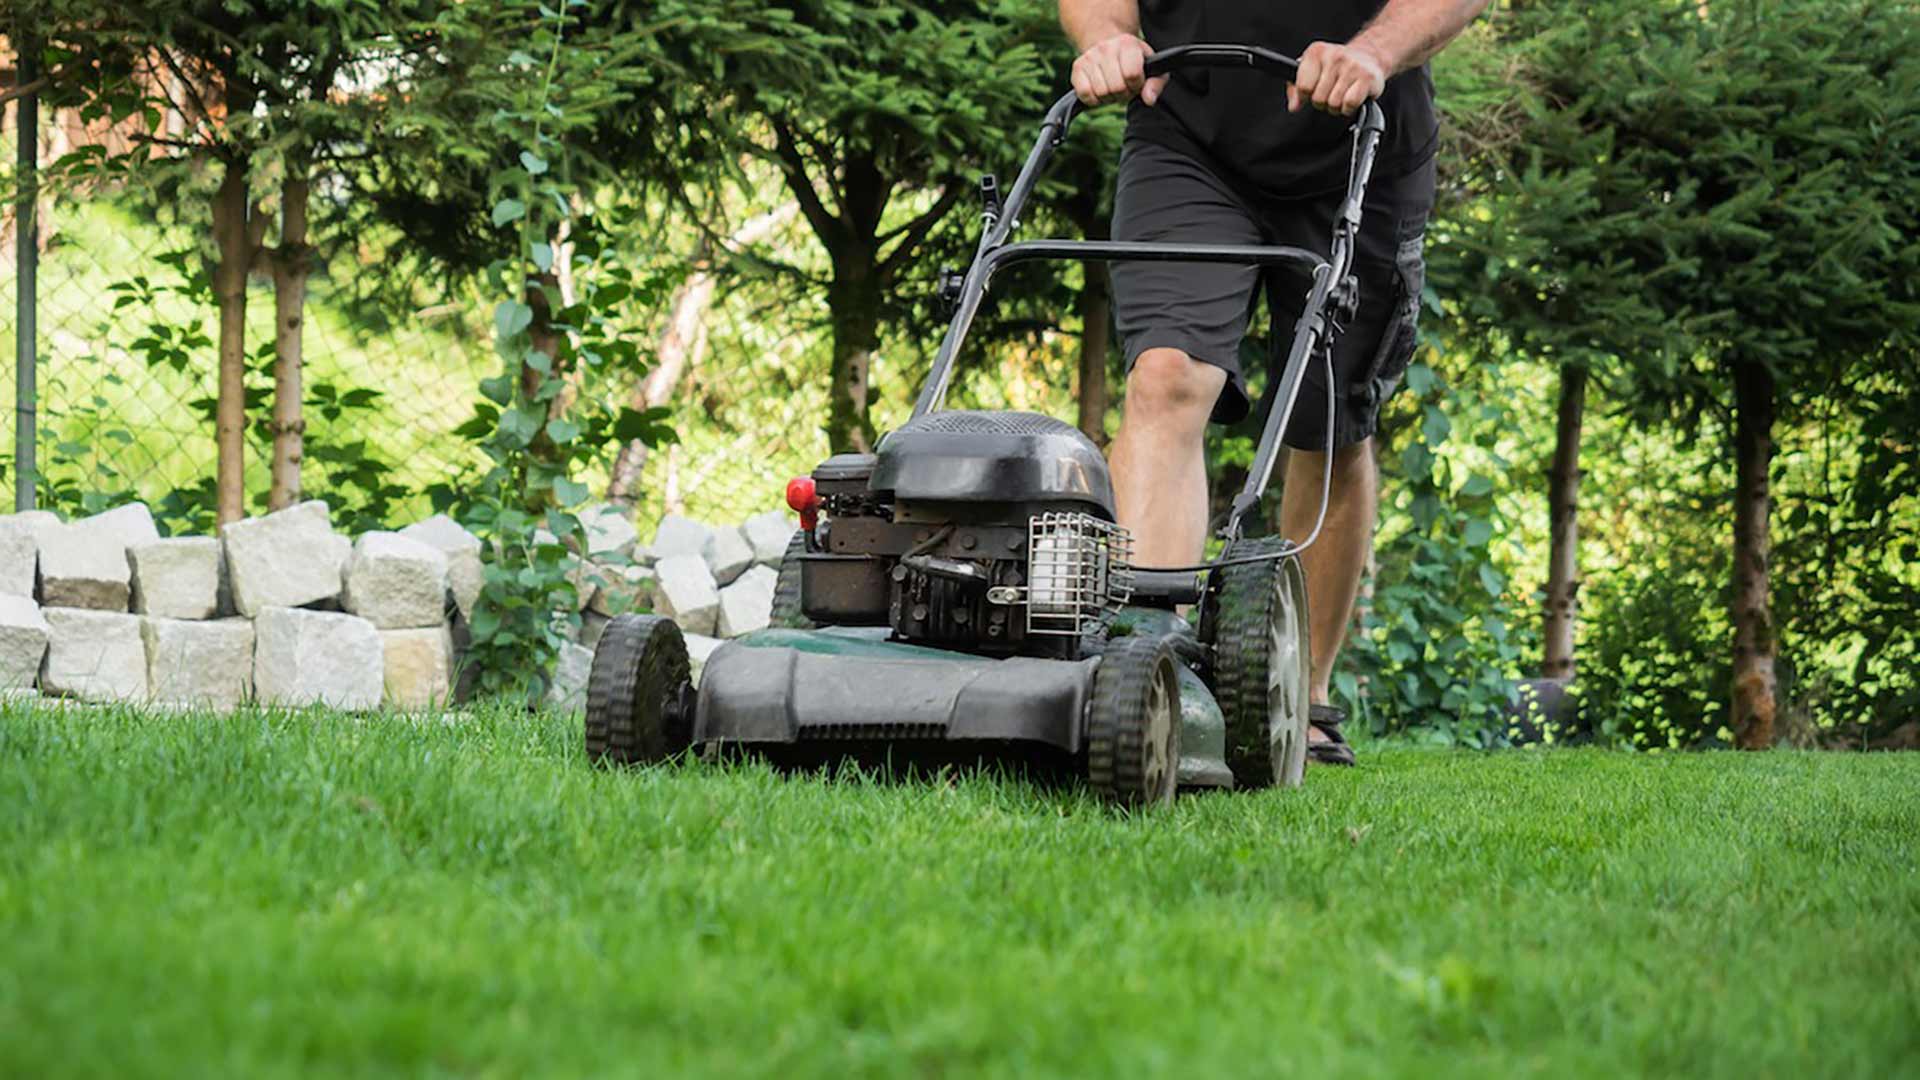 Integra Lawns Shares 6 Lawn Mowing Tips To Keep Your Grass Healthy!